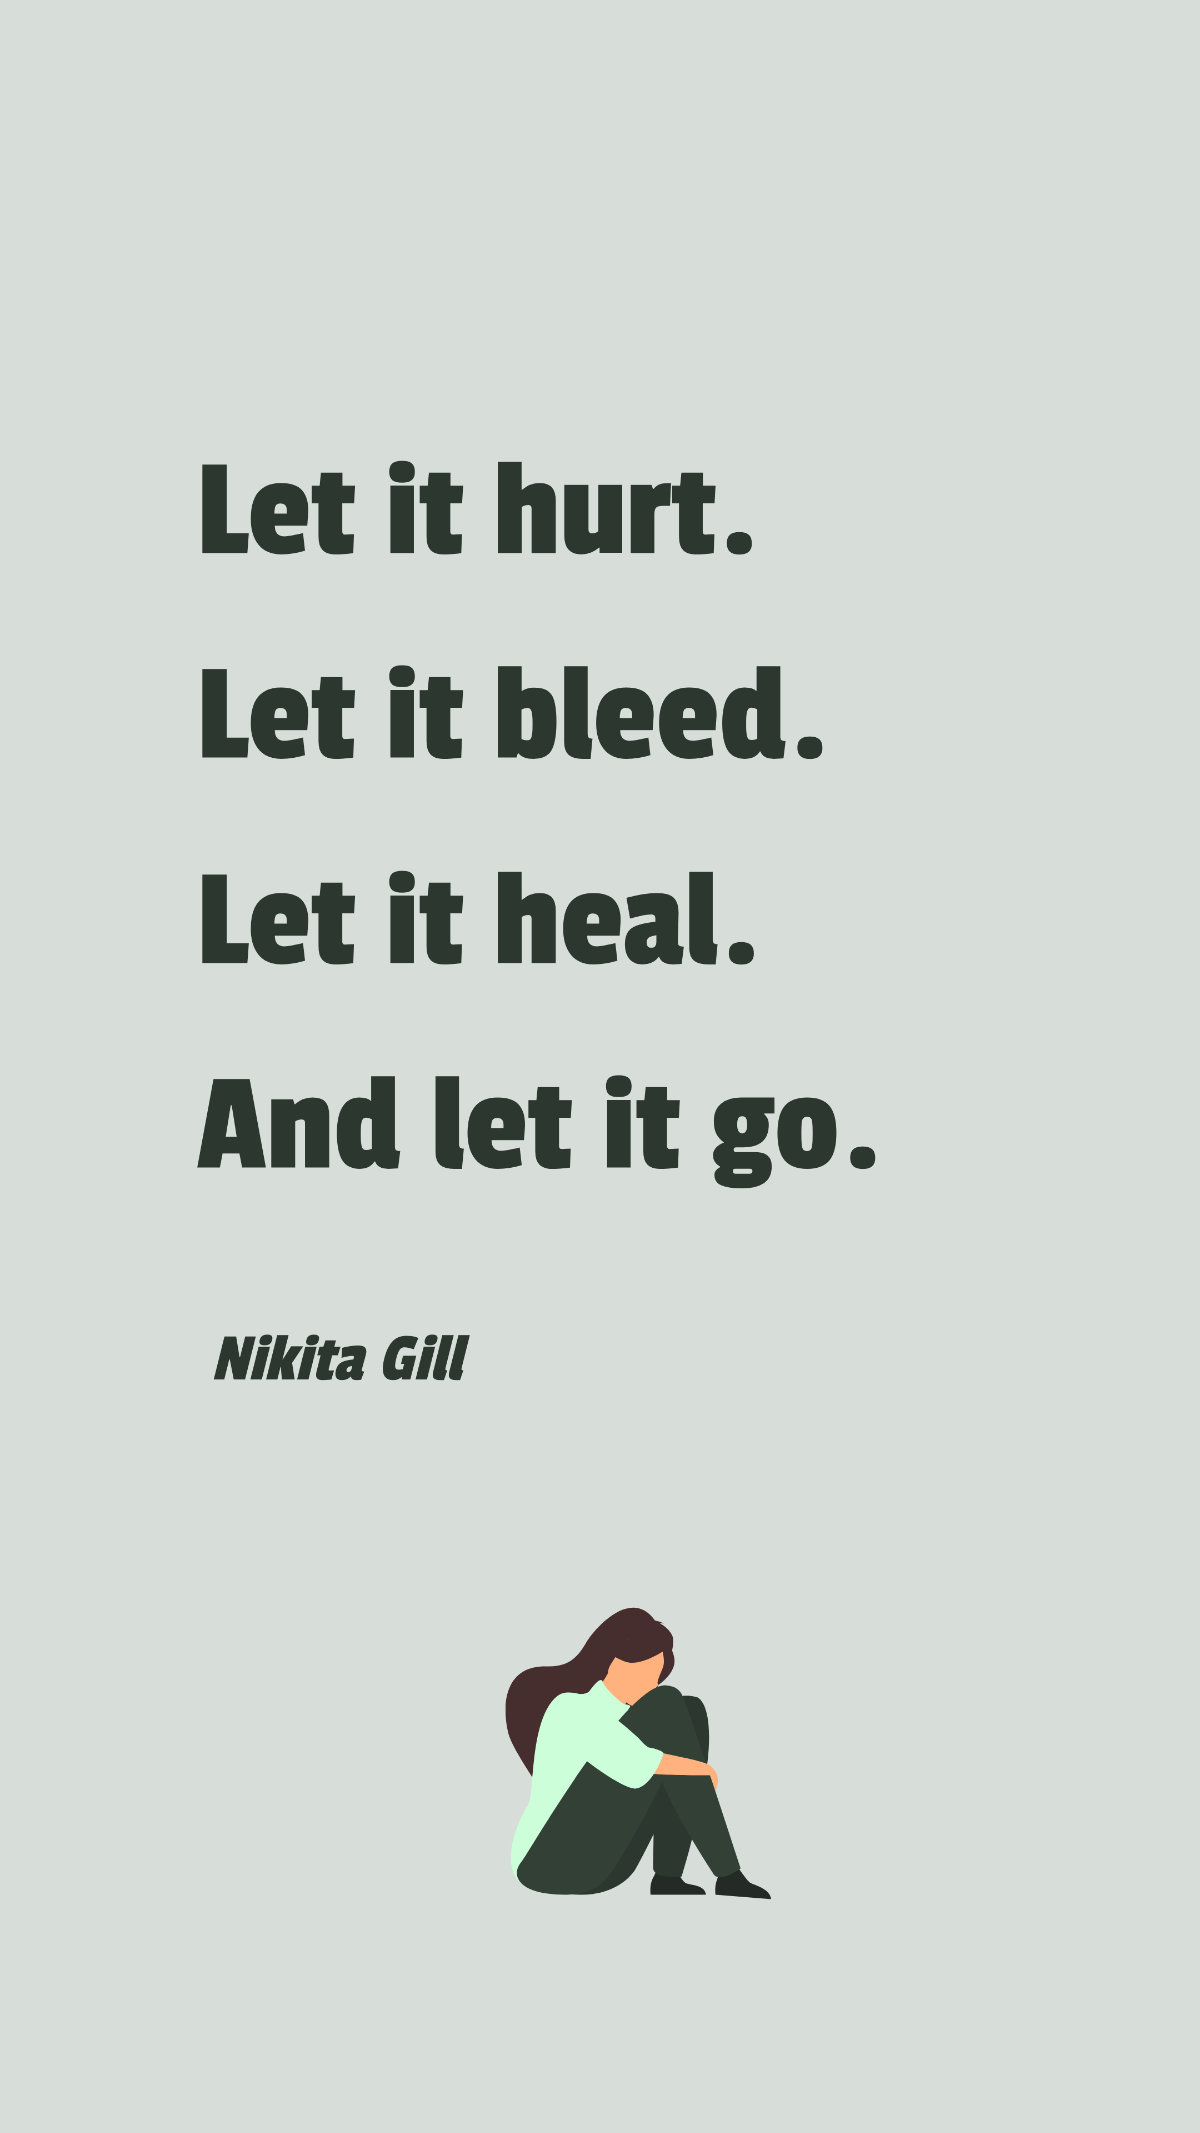 Nikita Gill - Let it hurt. Let it bleed. Let it heal. And let it go.